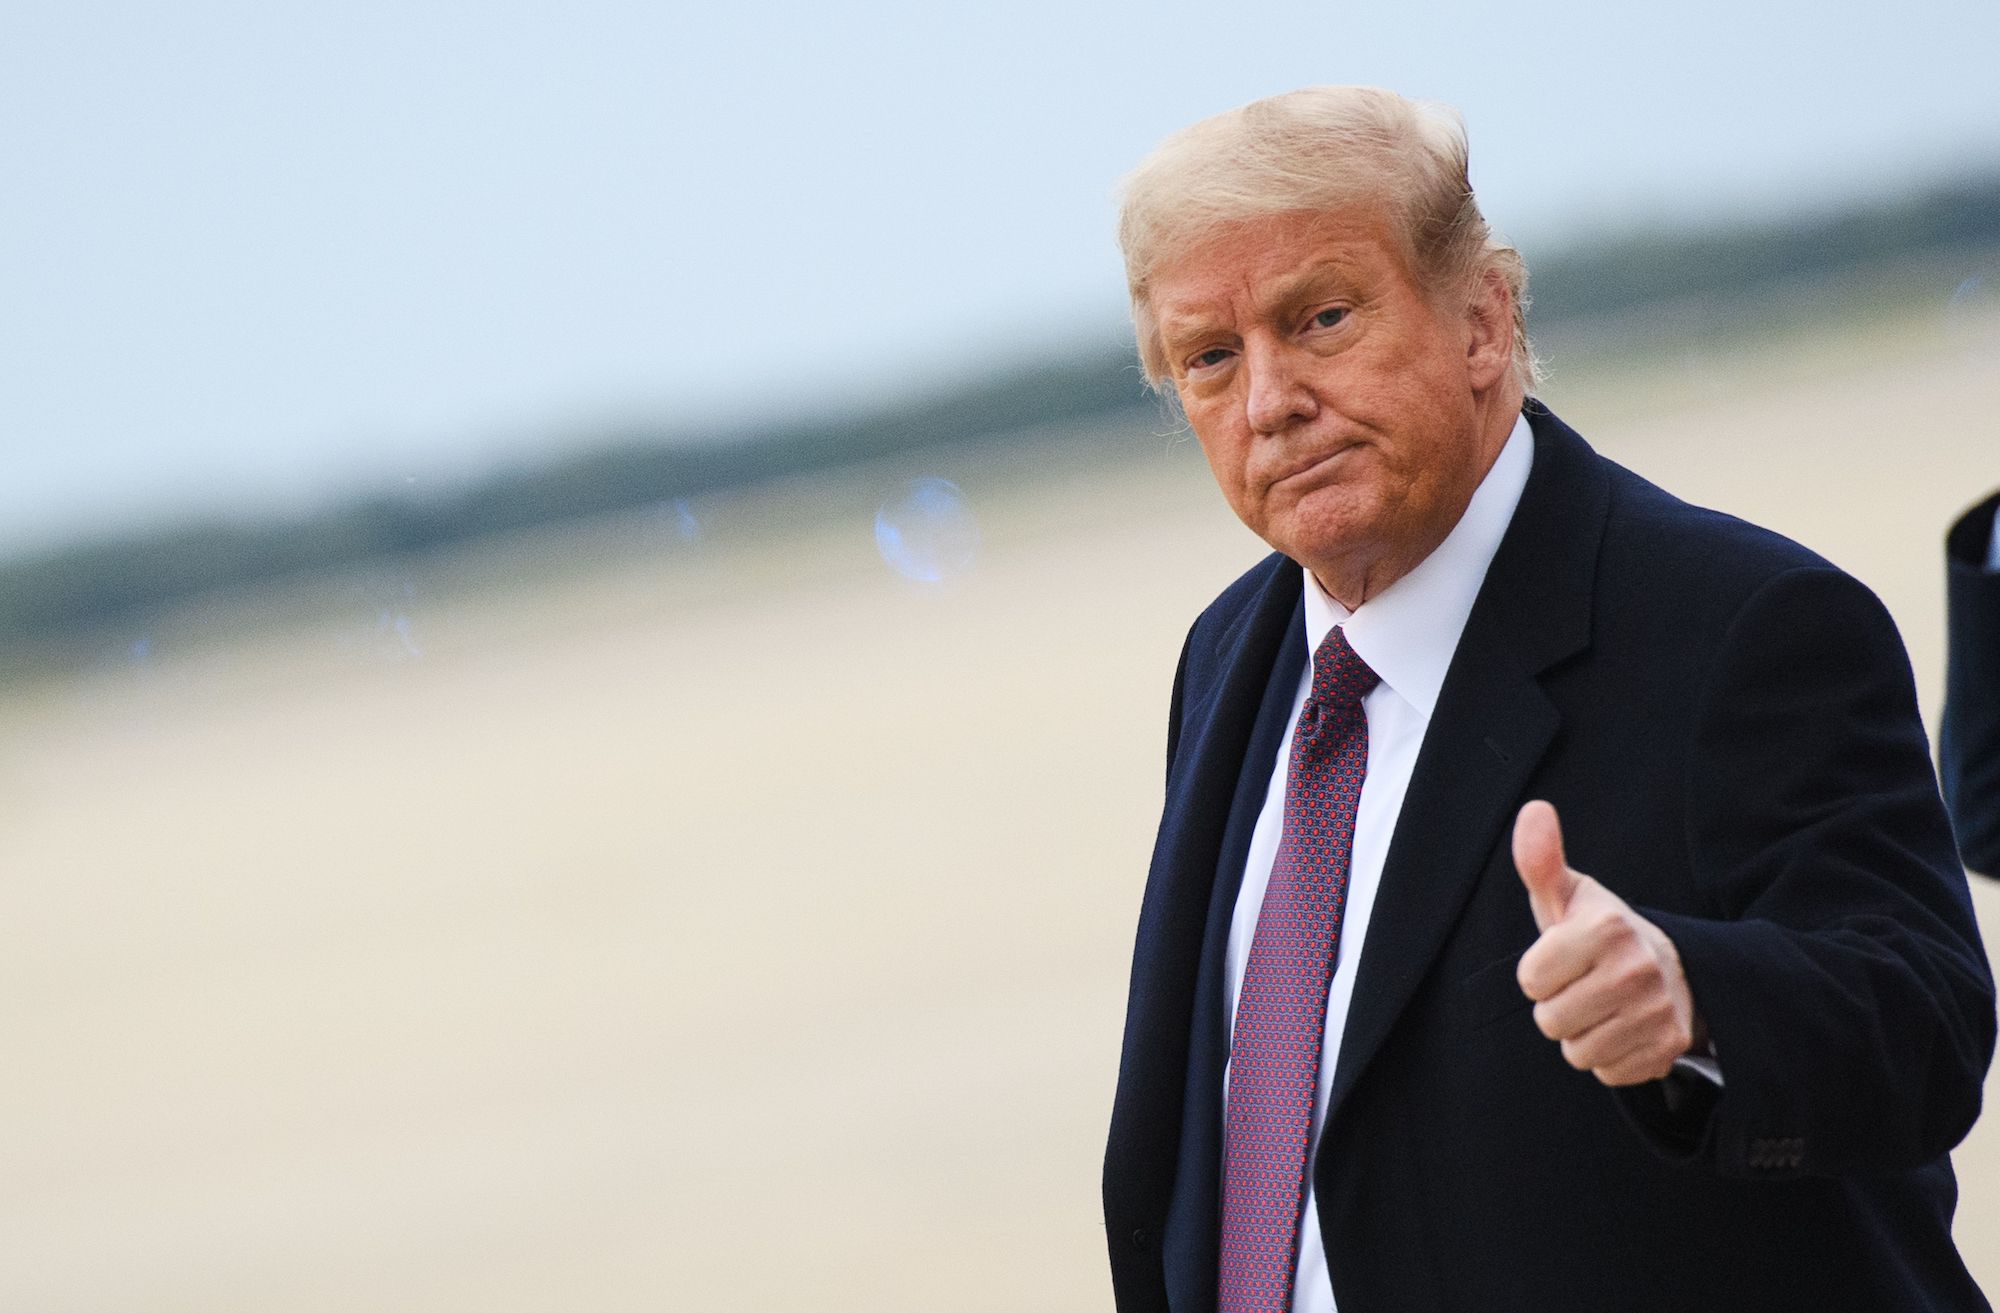 US President Donald Trump gives a thumbs up as he steps off Air Force One upon arrival at Andrews Air Force Base in Maryland on October 1, 2020. - The US president announced in the small hours of October 2, 2020, that he and First Lady Melania Trump would be going into quarantine after they were both found to have contracted the novel coronavirus. (Photo by MANDEL NGAN / AFP) (Photo by MANDEL NGAN/AFP via Getty Images)